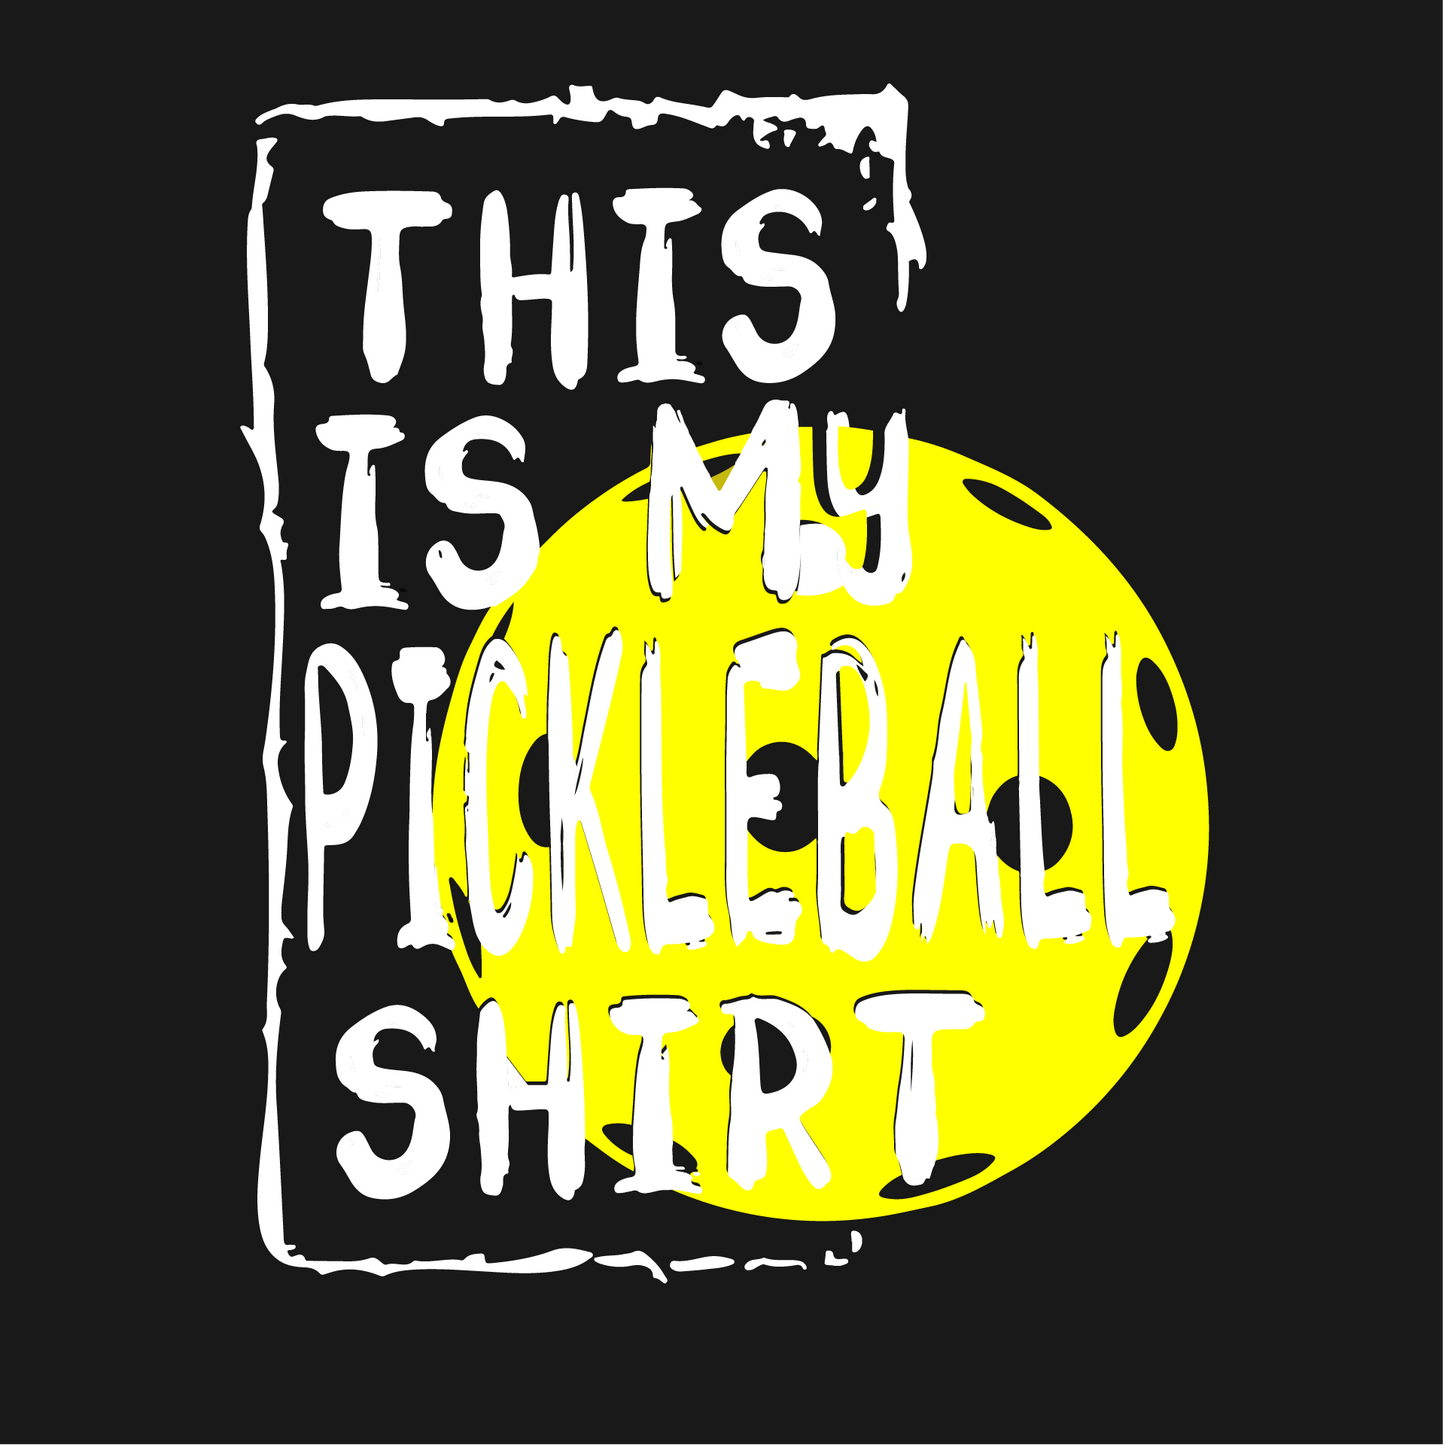 This Is My Pickleball Shirt | Women’s Racerback Tank | 100% Polyester